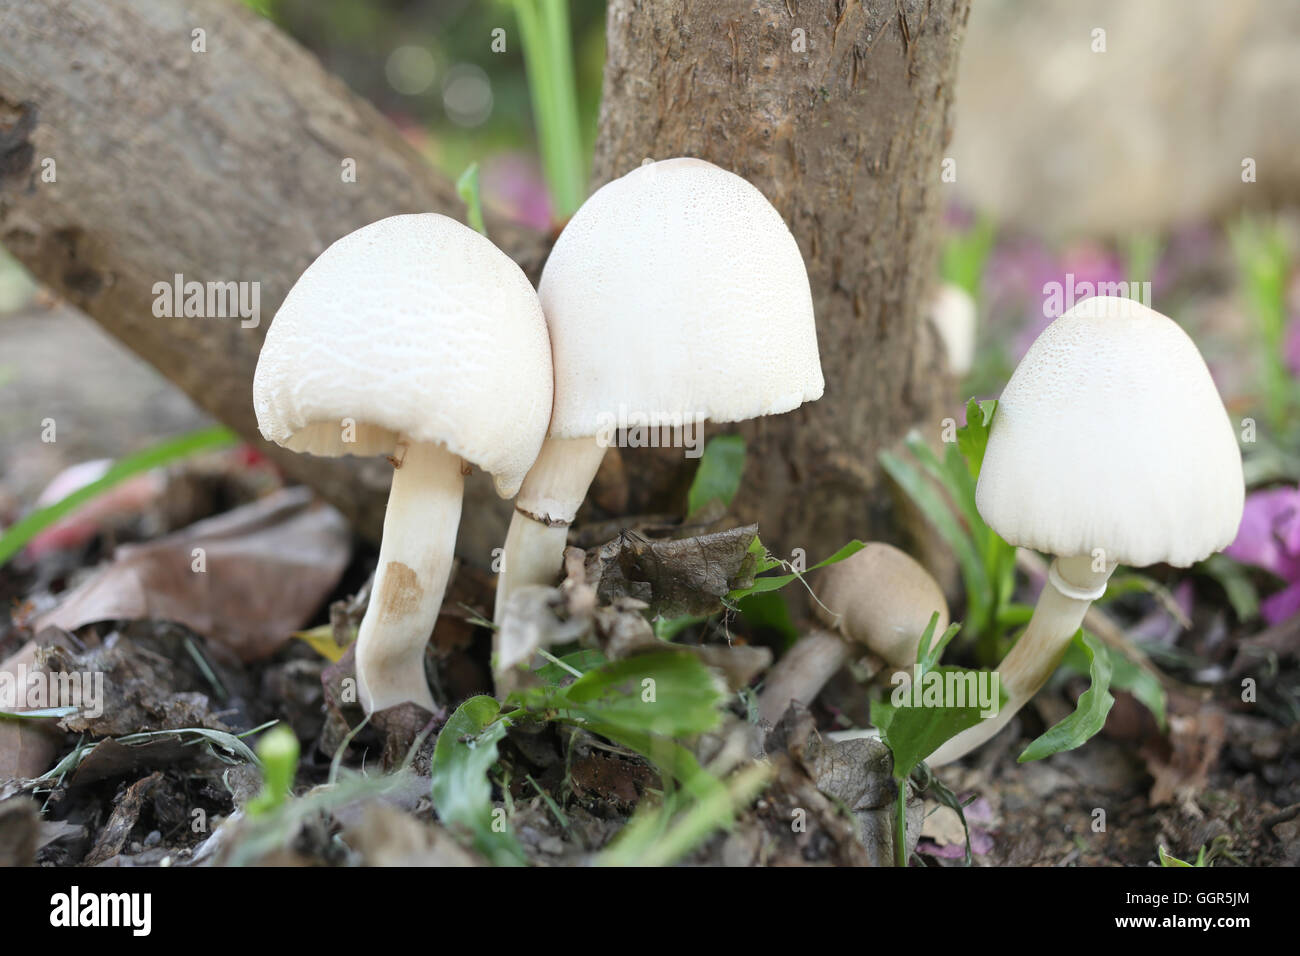 Poisonous mushrooms growing under the trees in the garden. Stock Photo